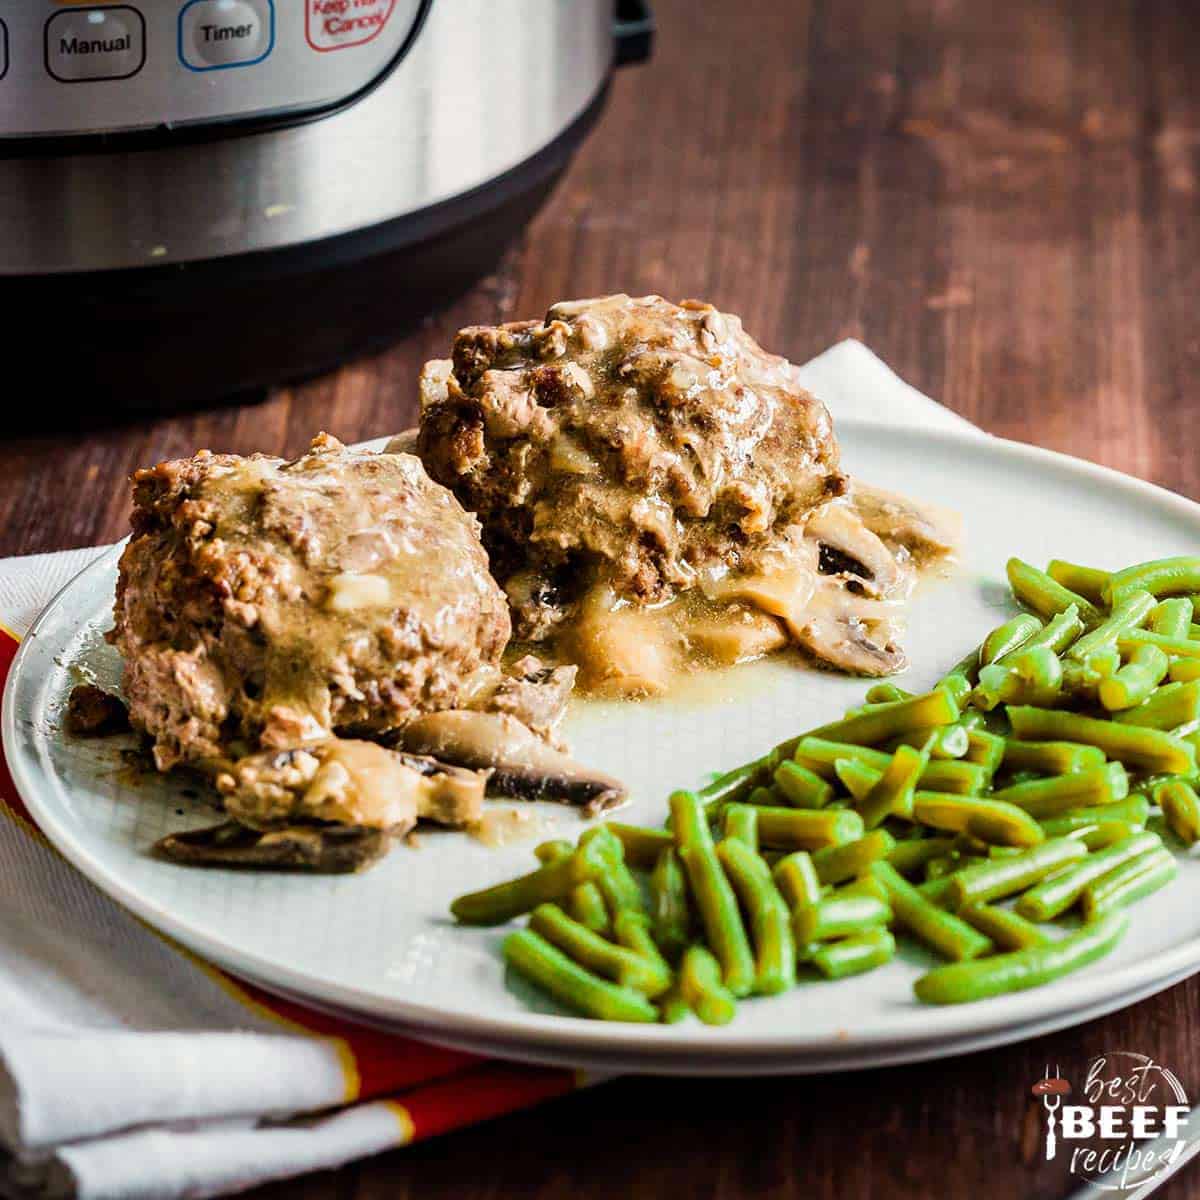 Two salisbury steaks on a plate with green beans